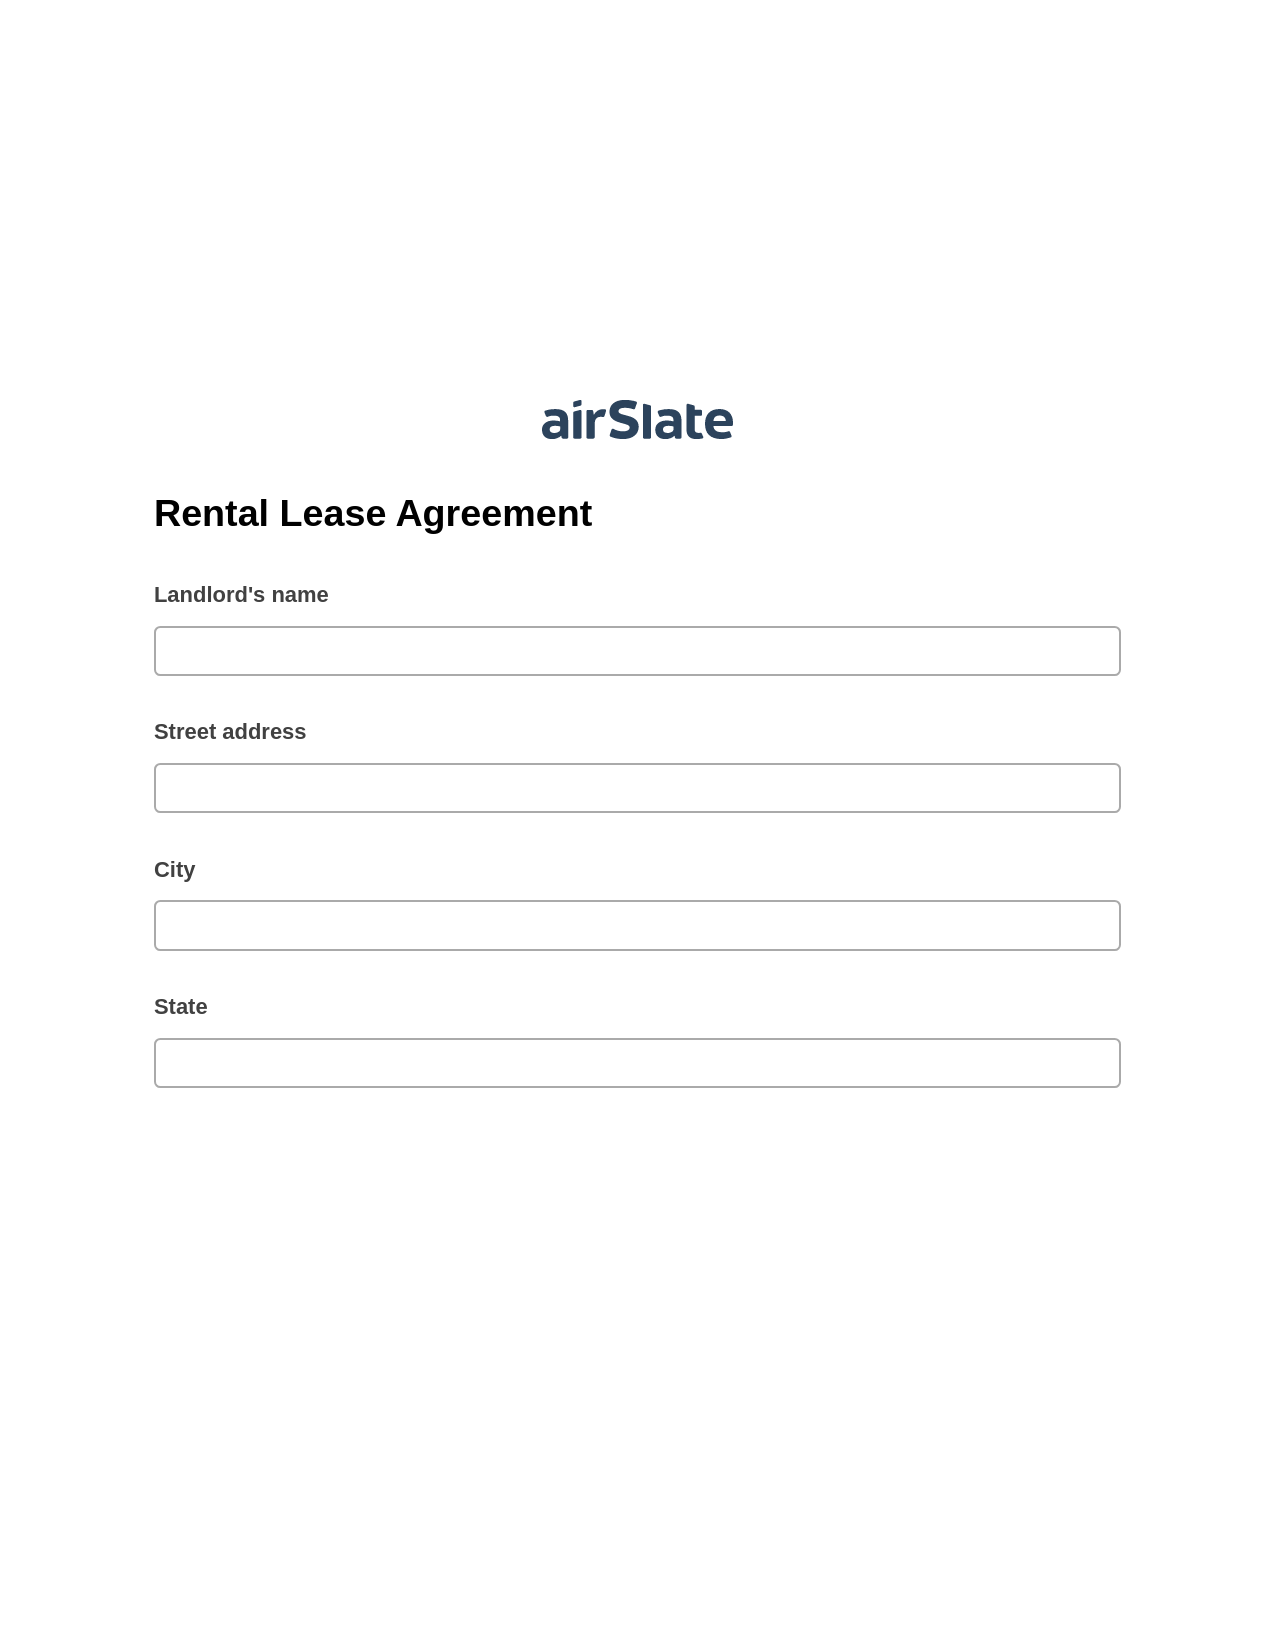 Multirole Rental Lease Agreement Pre-fill from CSV File Dropdown Options Bot, Mailchimp send Campaign bot, Export to Google Sheet Bot